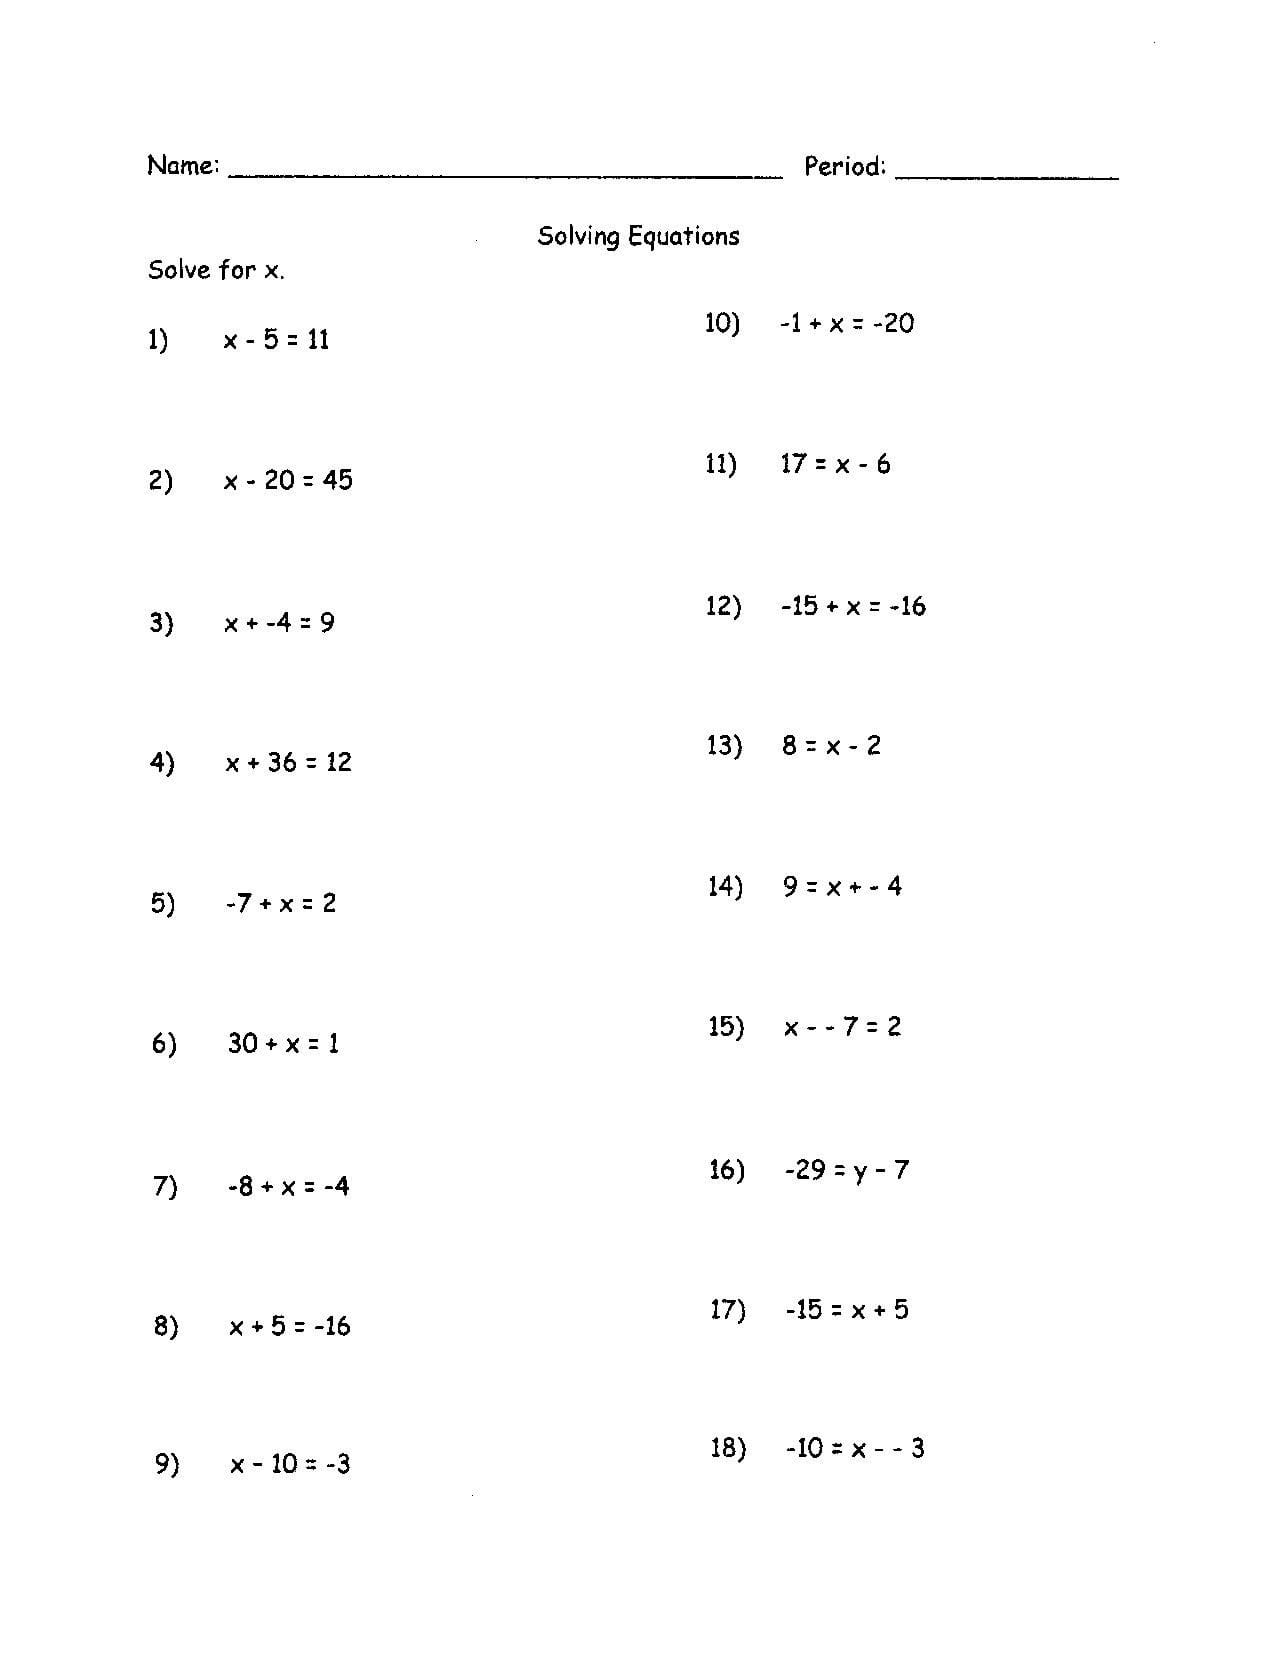 Solving Equations With Variables On Both Sides Worksheet Answer Key Within Solving Equations With Variables On Both Sides Worksheet Answer Key